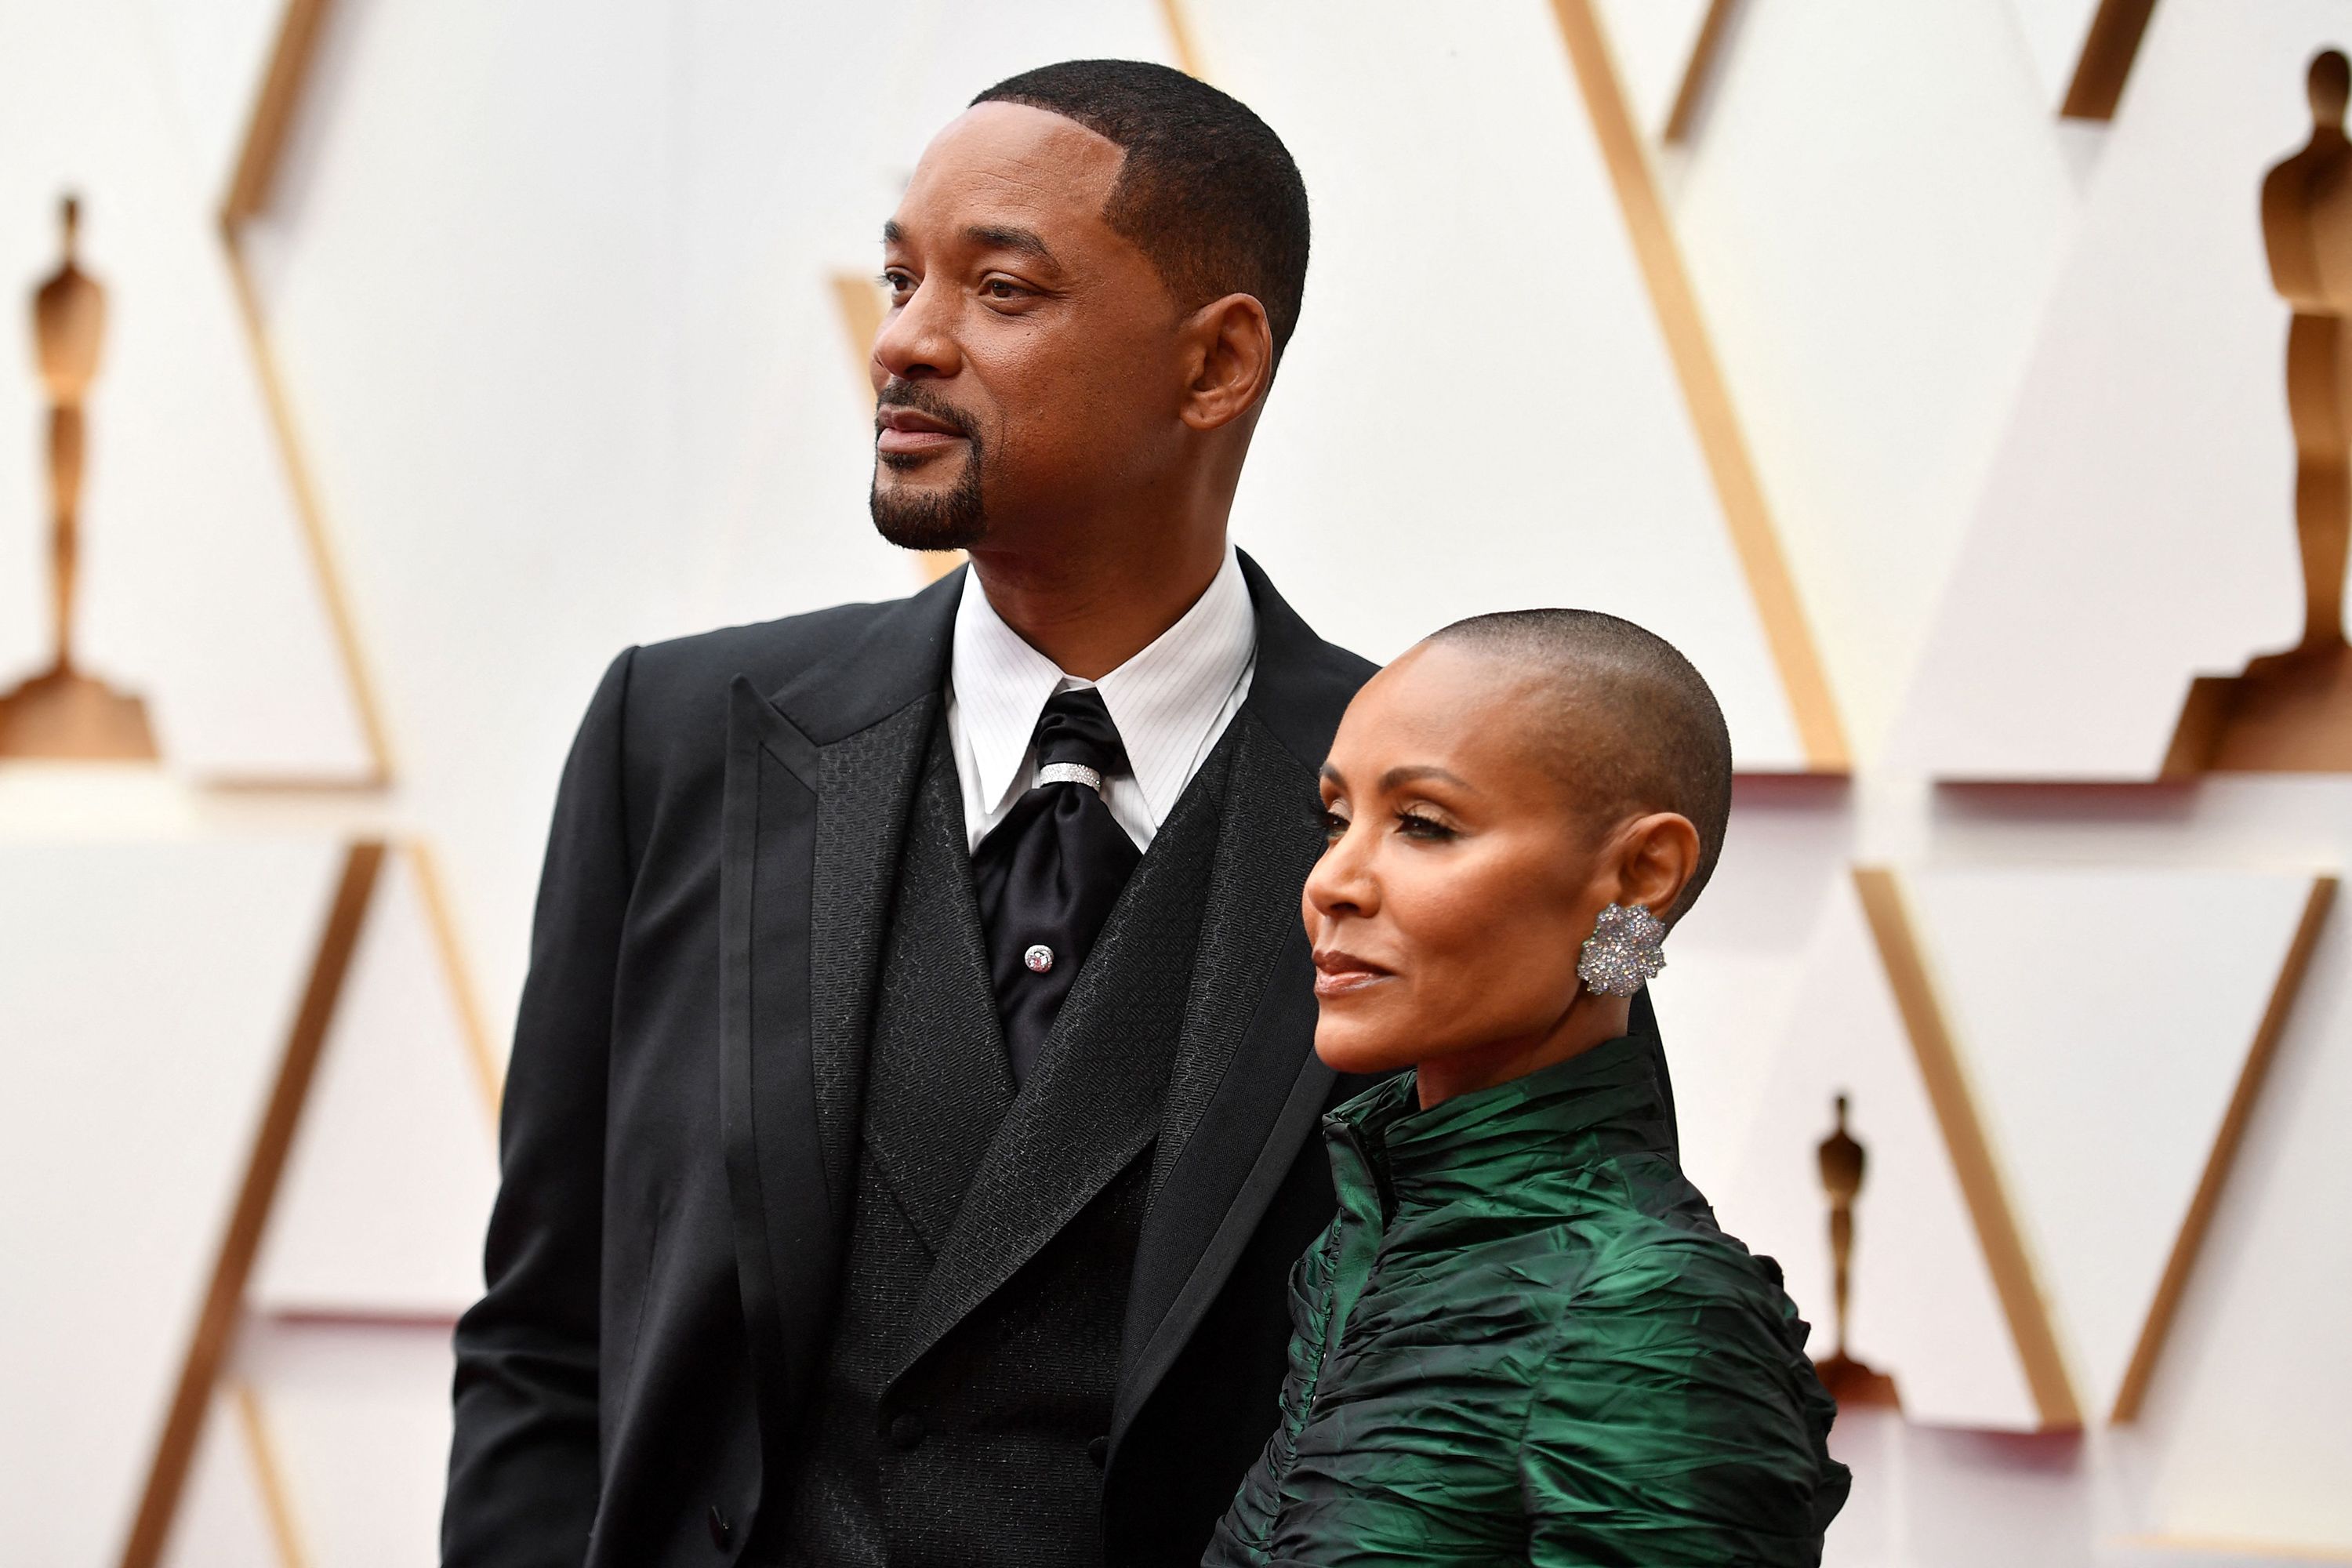 Jada Pinkett Smith reveals she and Will Smith are separated